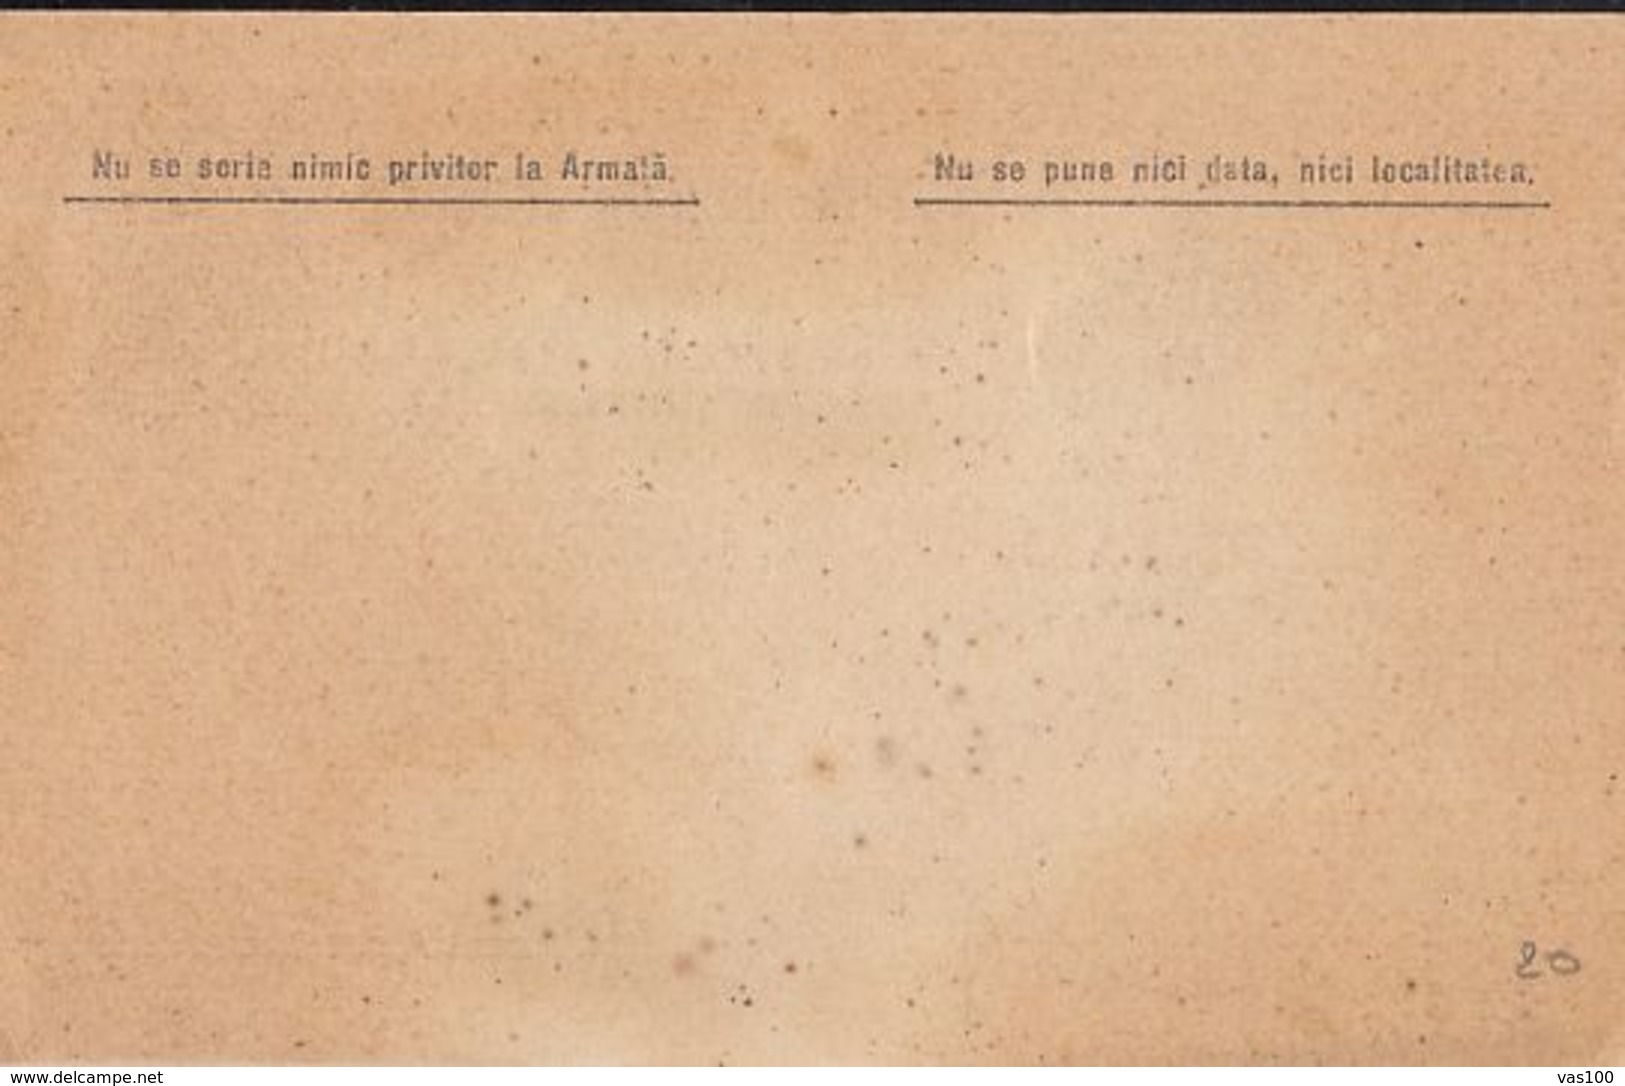 WW1 LETTER, MILITARY CENSORED, KING FERDINAND PC STATIONERY, ENTIER POSTAL, ROMANIA - 1. Weltkrieg (Briefe)